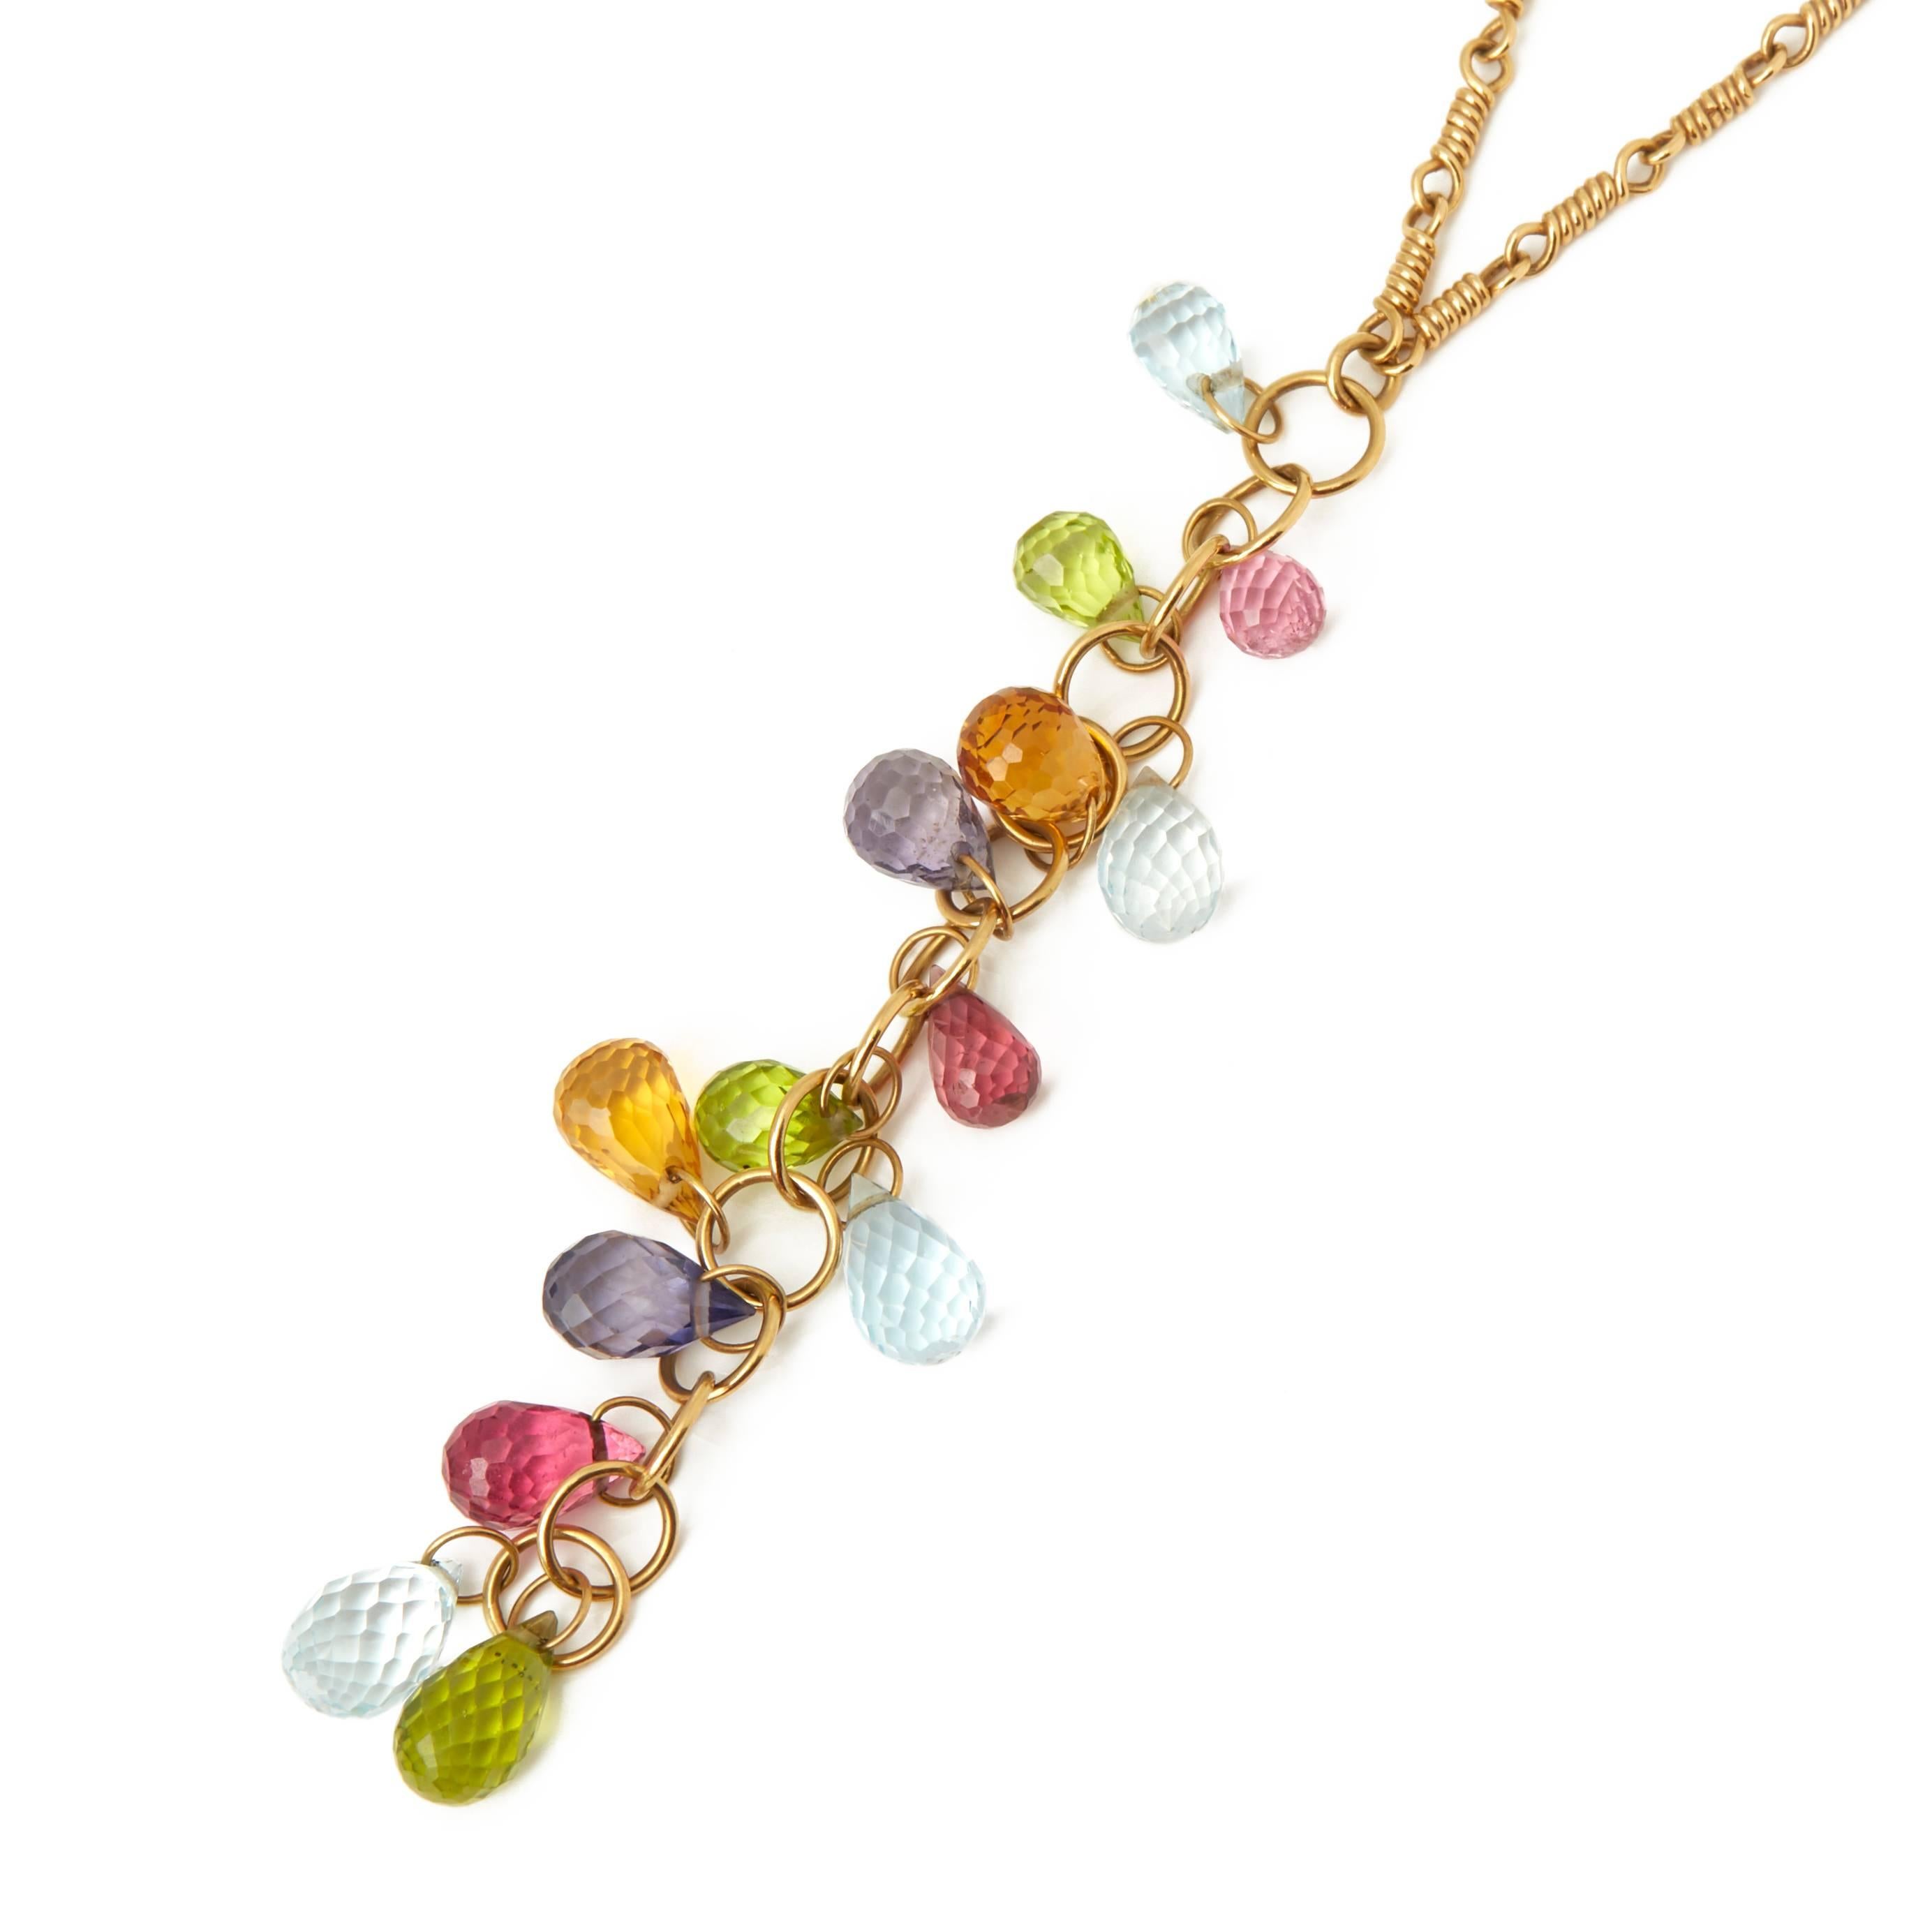 Xupes Code: COM1683
Brand: Tiffany & Co.
Description: 18k Yellow Gold Multi Gem Rainbow Necklace
Accompanied With: Box Only
Gender: Ladies
Pendant Length: 6cm
Pendant Width: 1.1cm
Clasp Type: Hook
Condition: 9
Material: Yellow Gold
Total Weight: